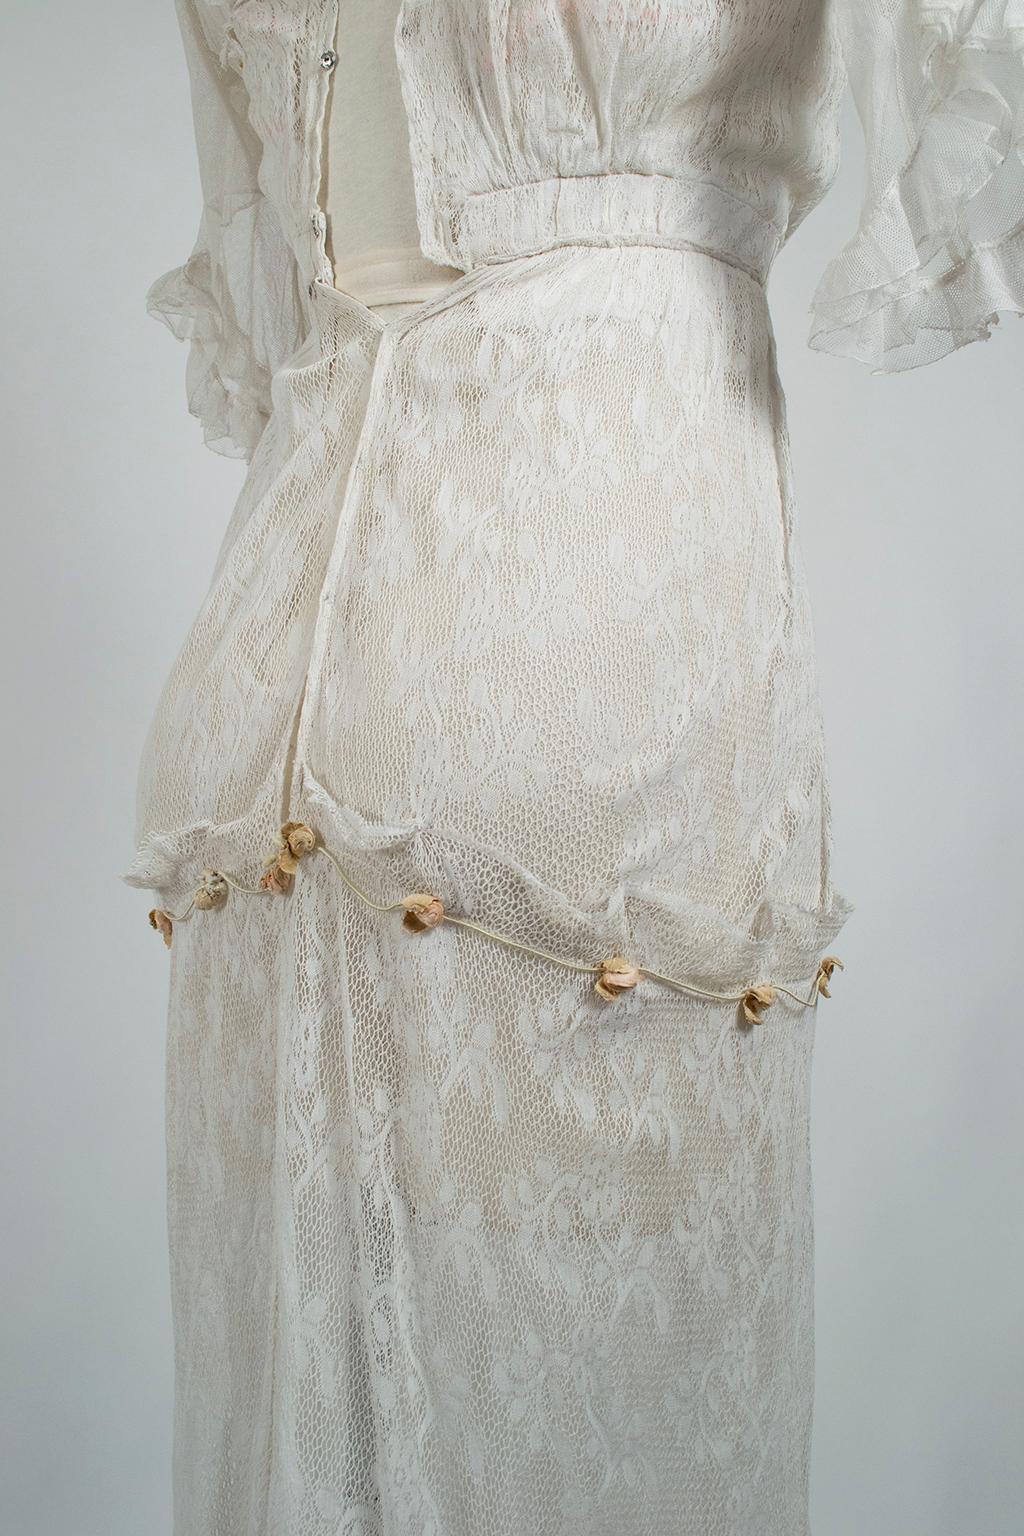 White Edwardian Net Rosebud Afternoon Tea or Bridal Gown - XXS, Early 1900s For Sale 7